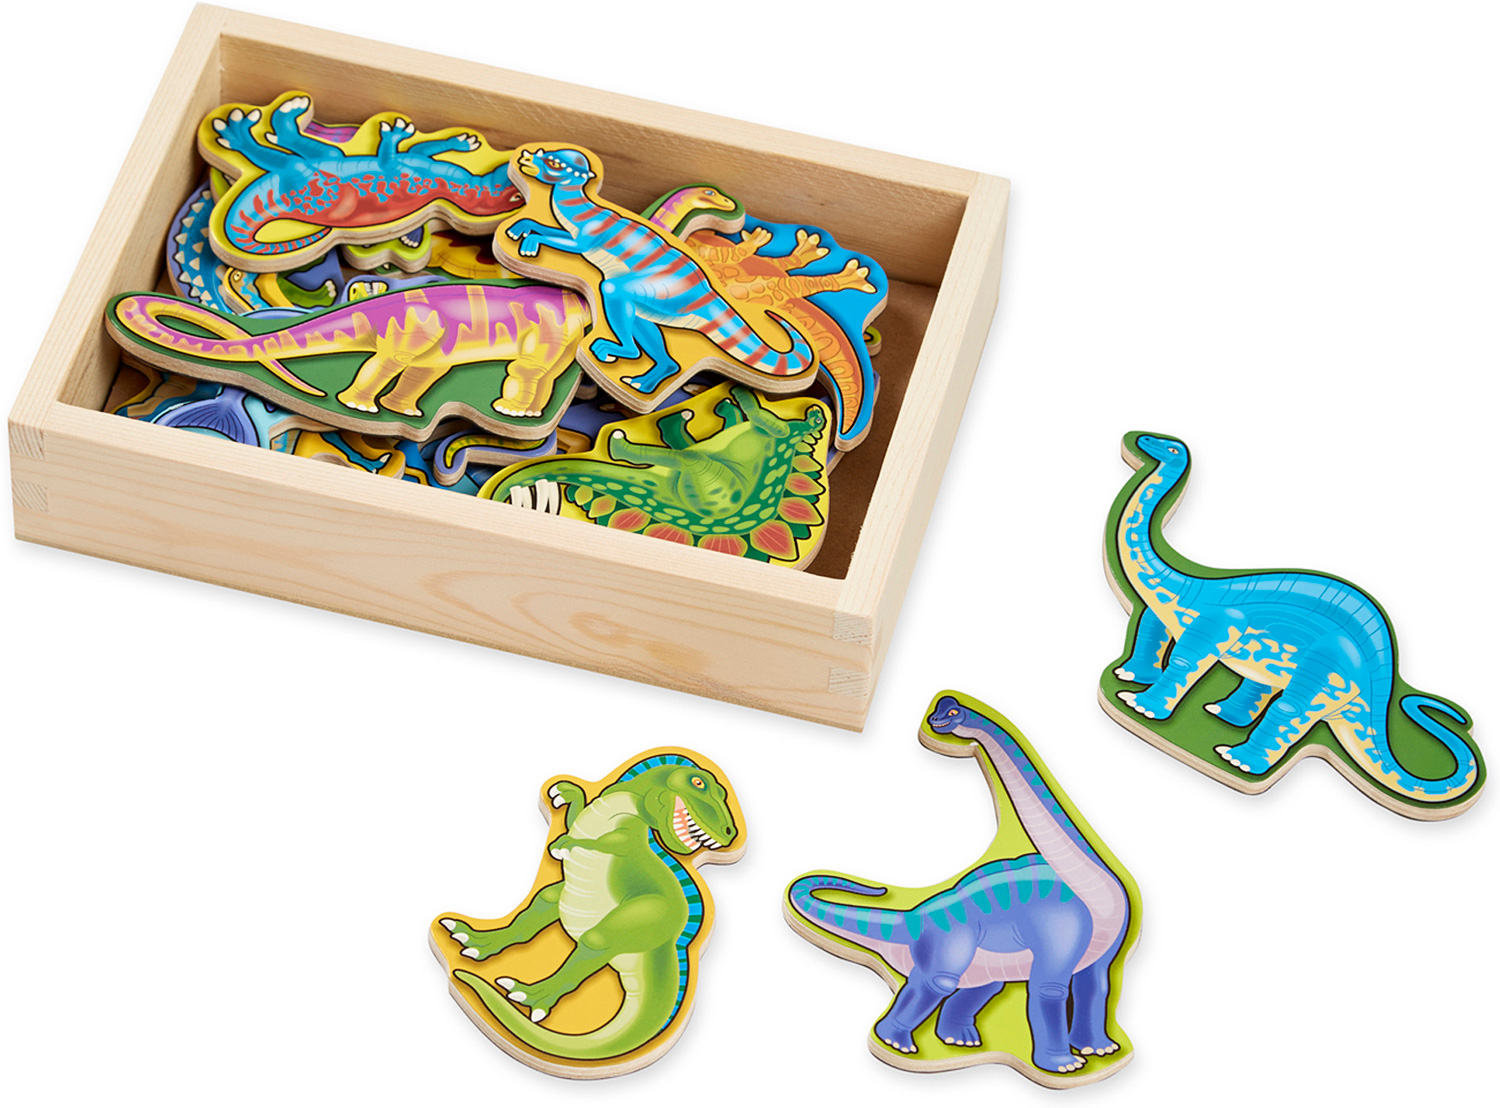 Magnetic Book Dinosaurs 36 Elements, Toys \ Jigsaw & puzzle